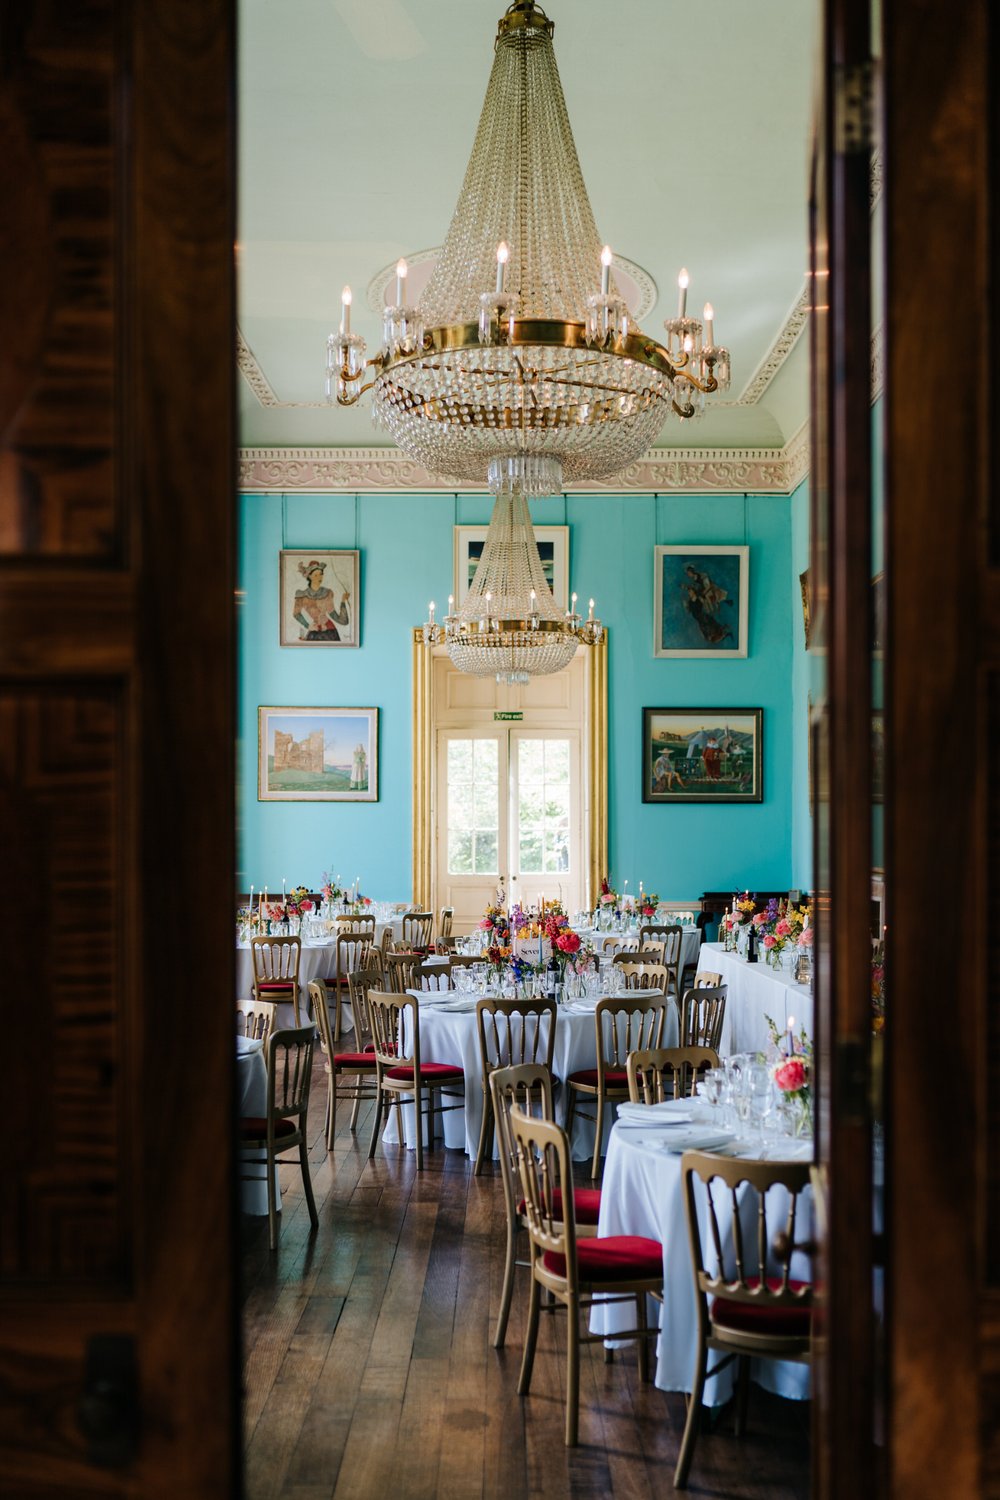 Photograph of quirky reception room at Walcot Hall with blue walls and ornate chandelier